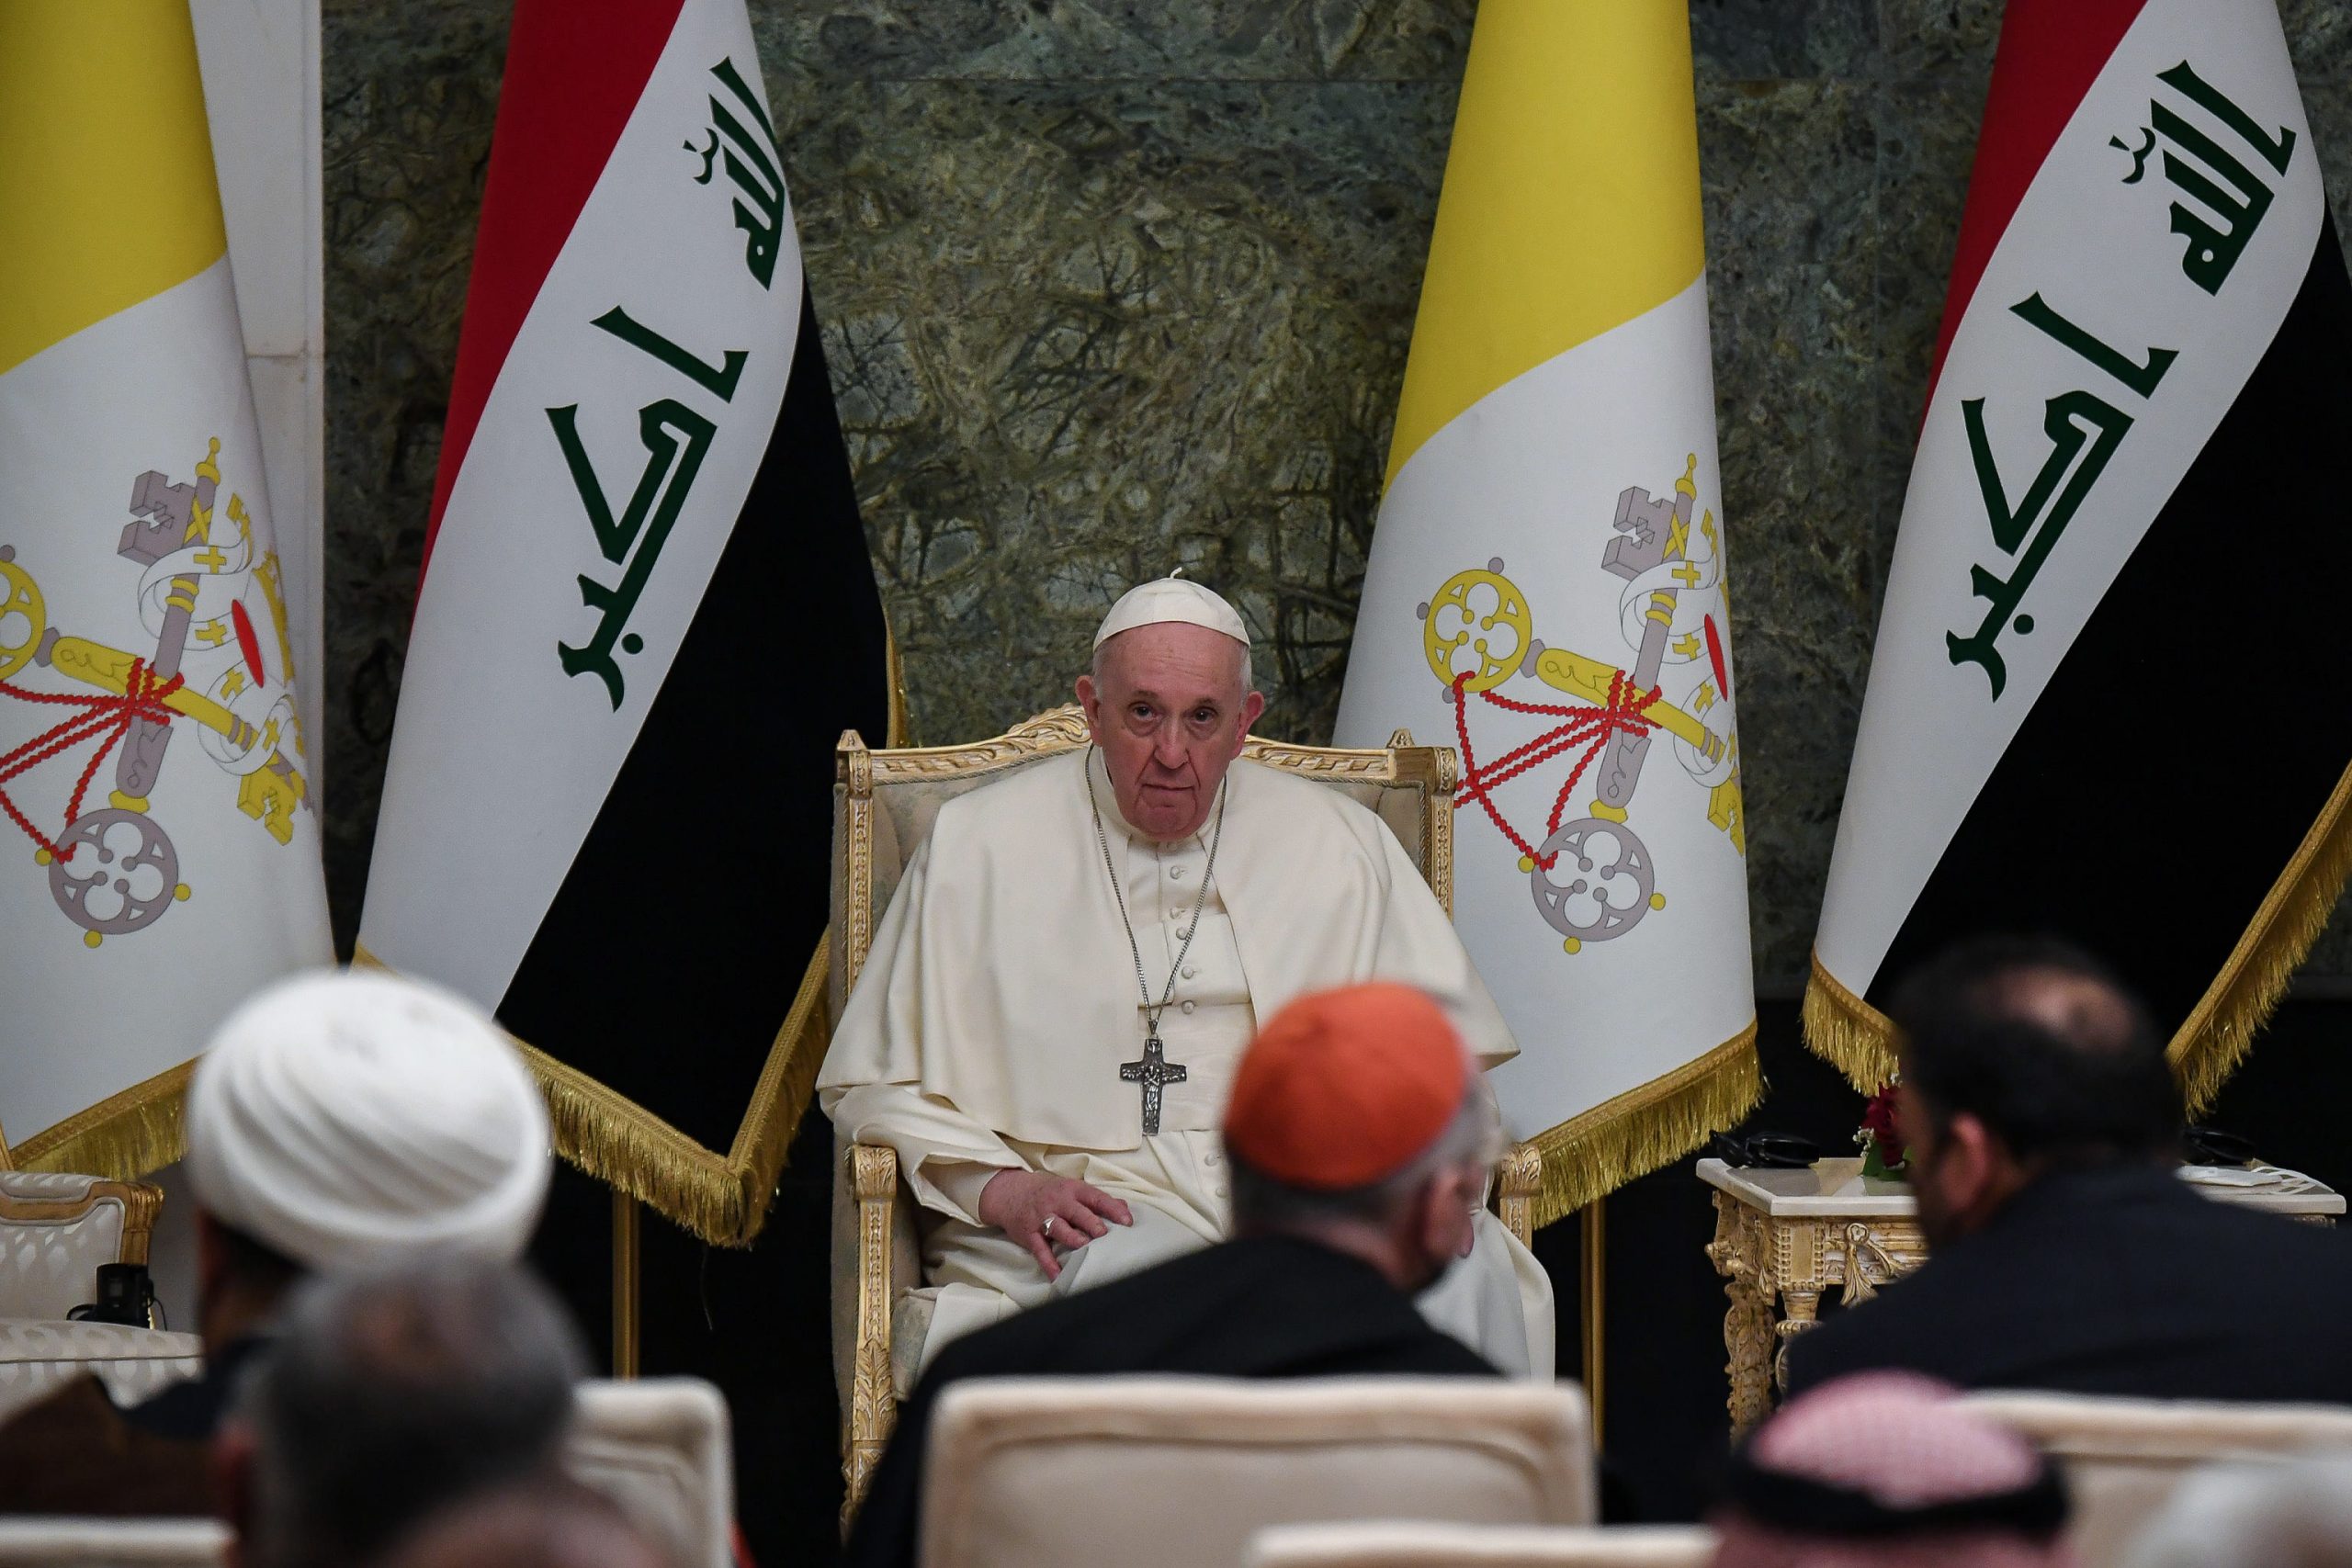 epa09054724 Pope Francis attends a meeting with authorities, civil society and the diplomatic corps in the hall of the Presidential palace in Baghdad, Iraq, 05 March 2021. Pope Francis is visiting Iraq for an Apostolic Journey from 05 to 08 March 2021.  EPA/ALESSANDRO DI MEO